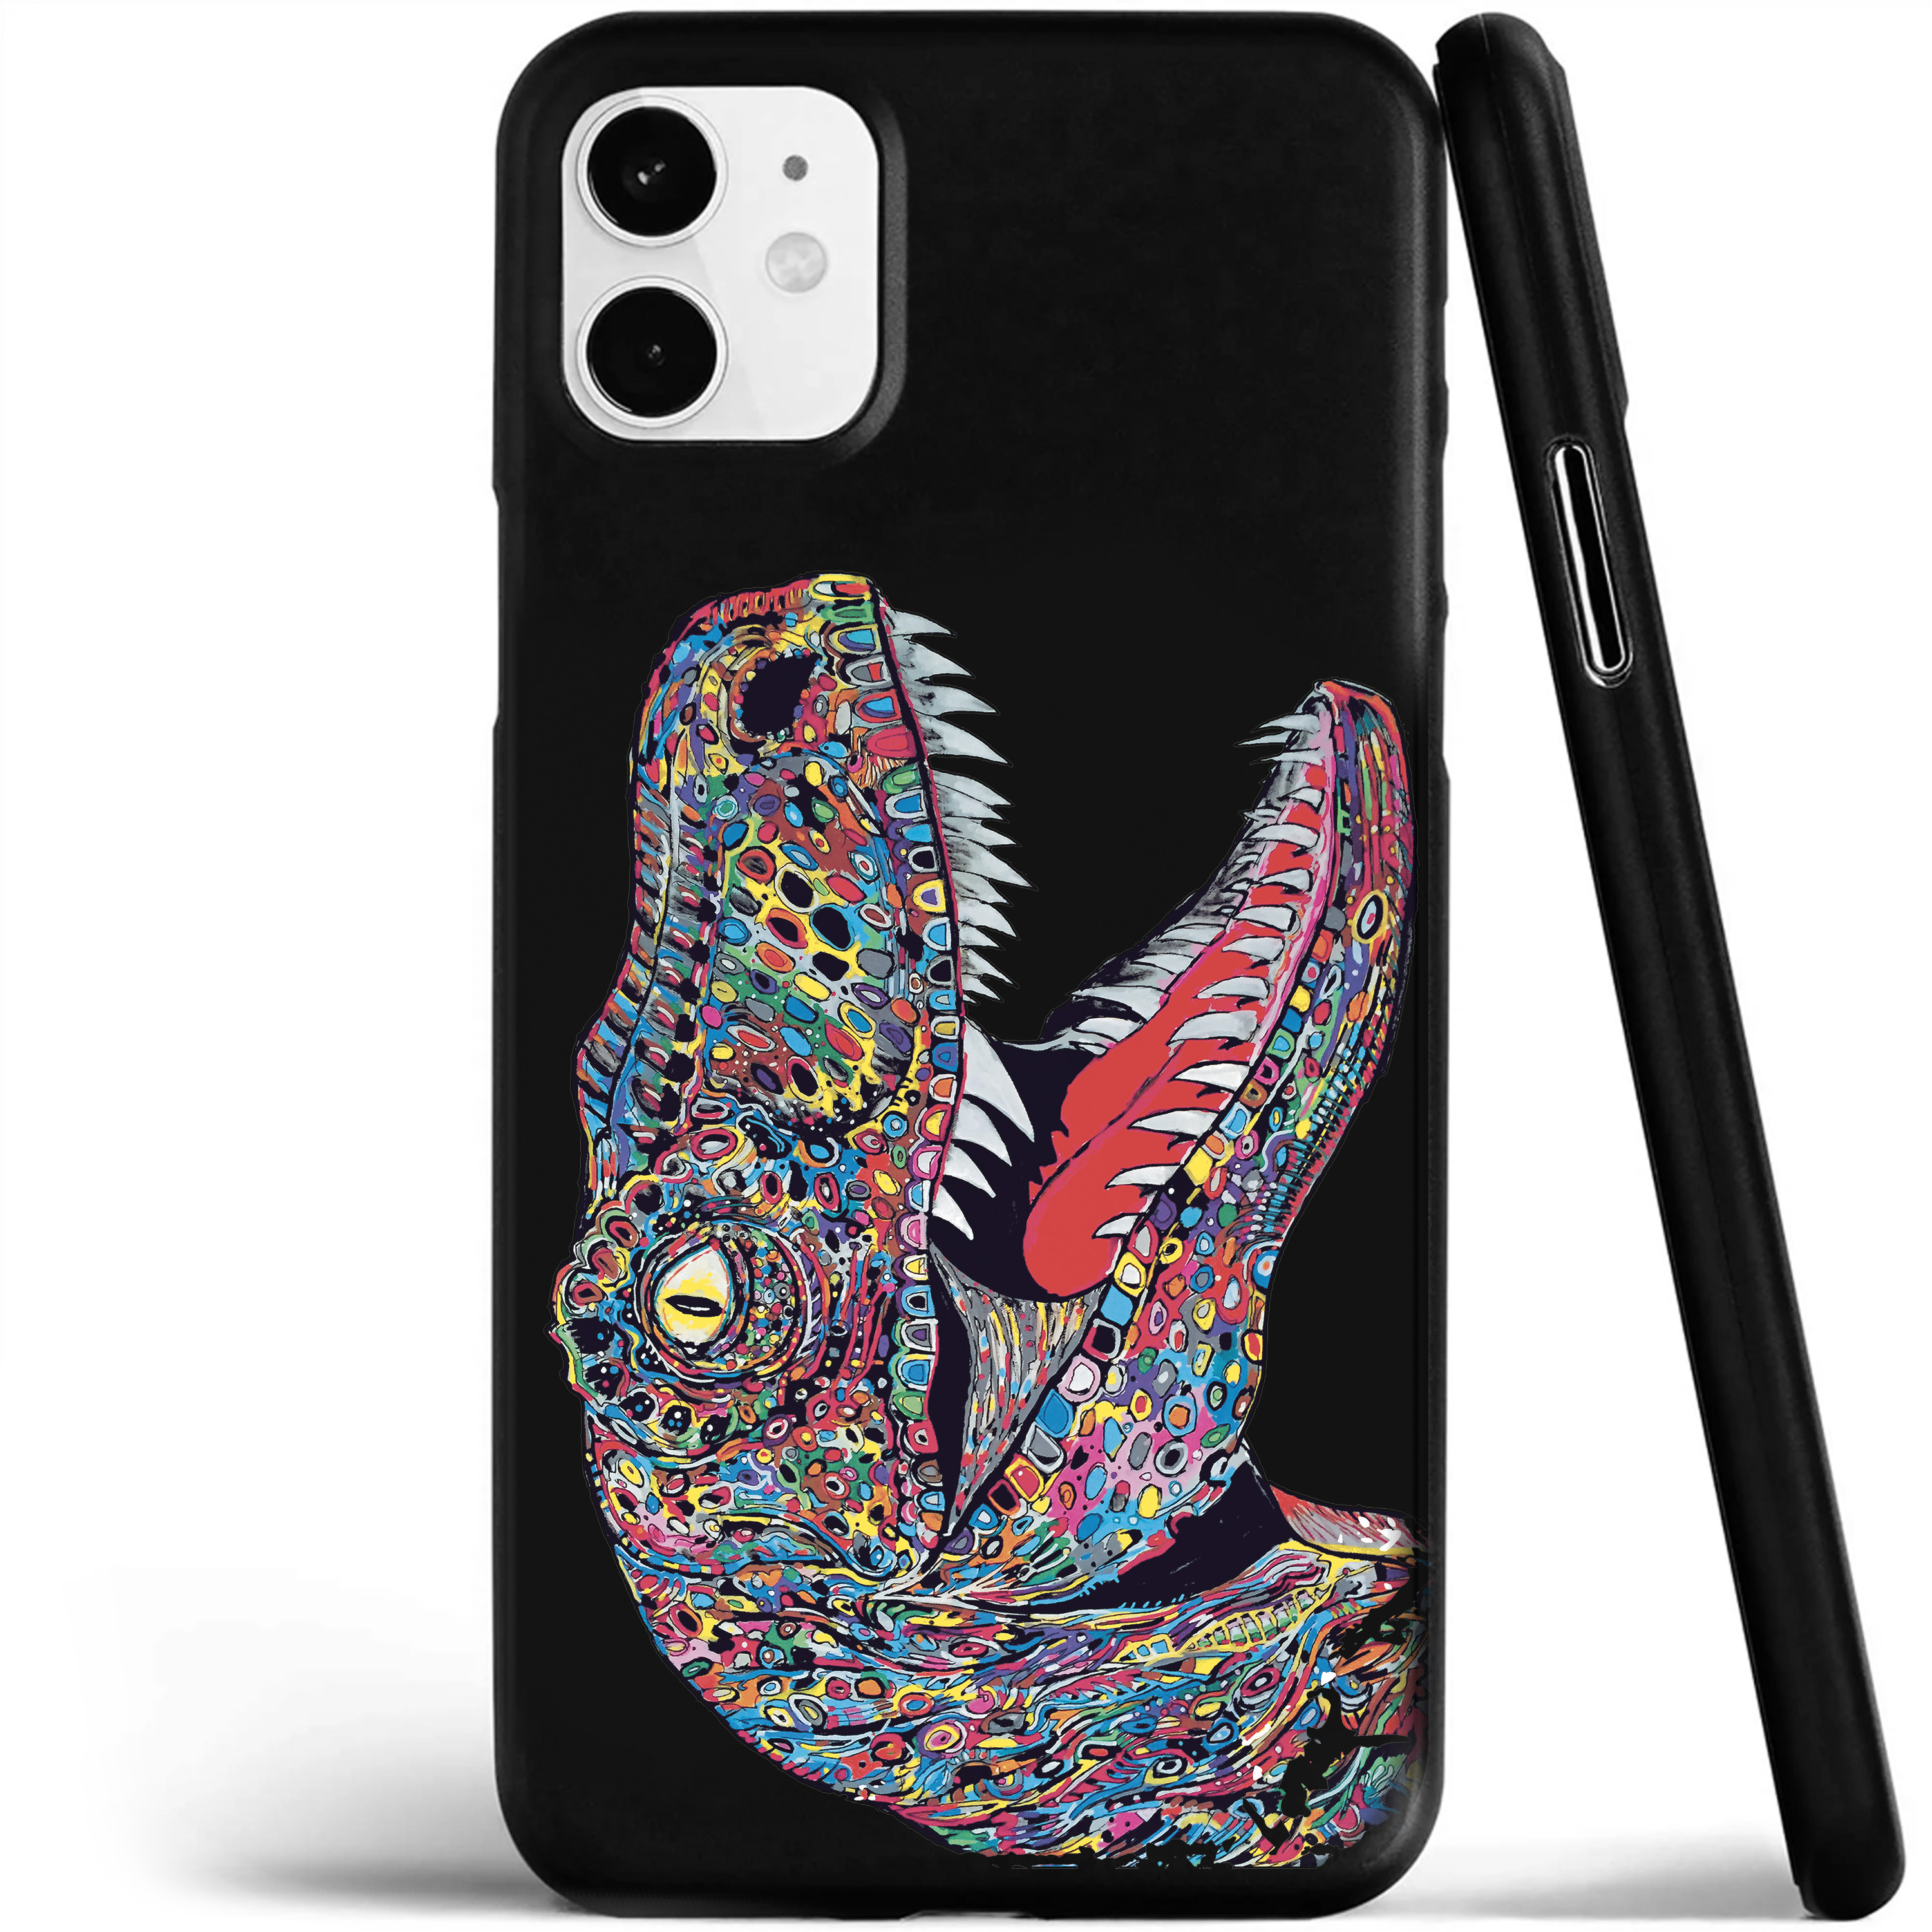 Gemello Store Official RAPTOR SMARTPHONE COVER